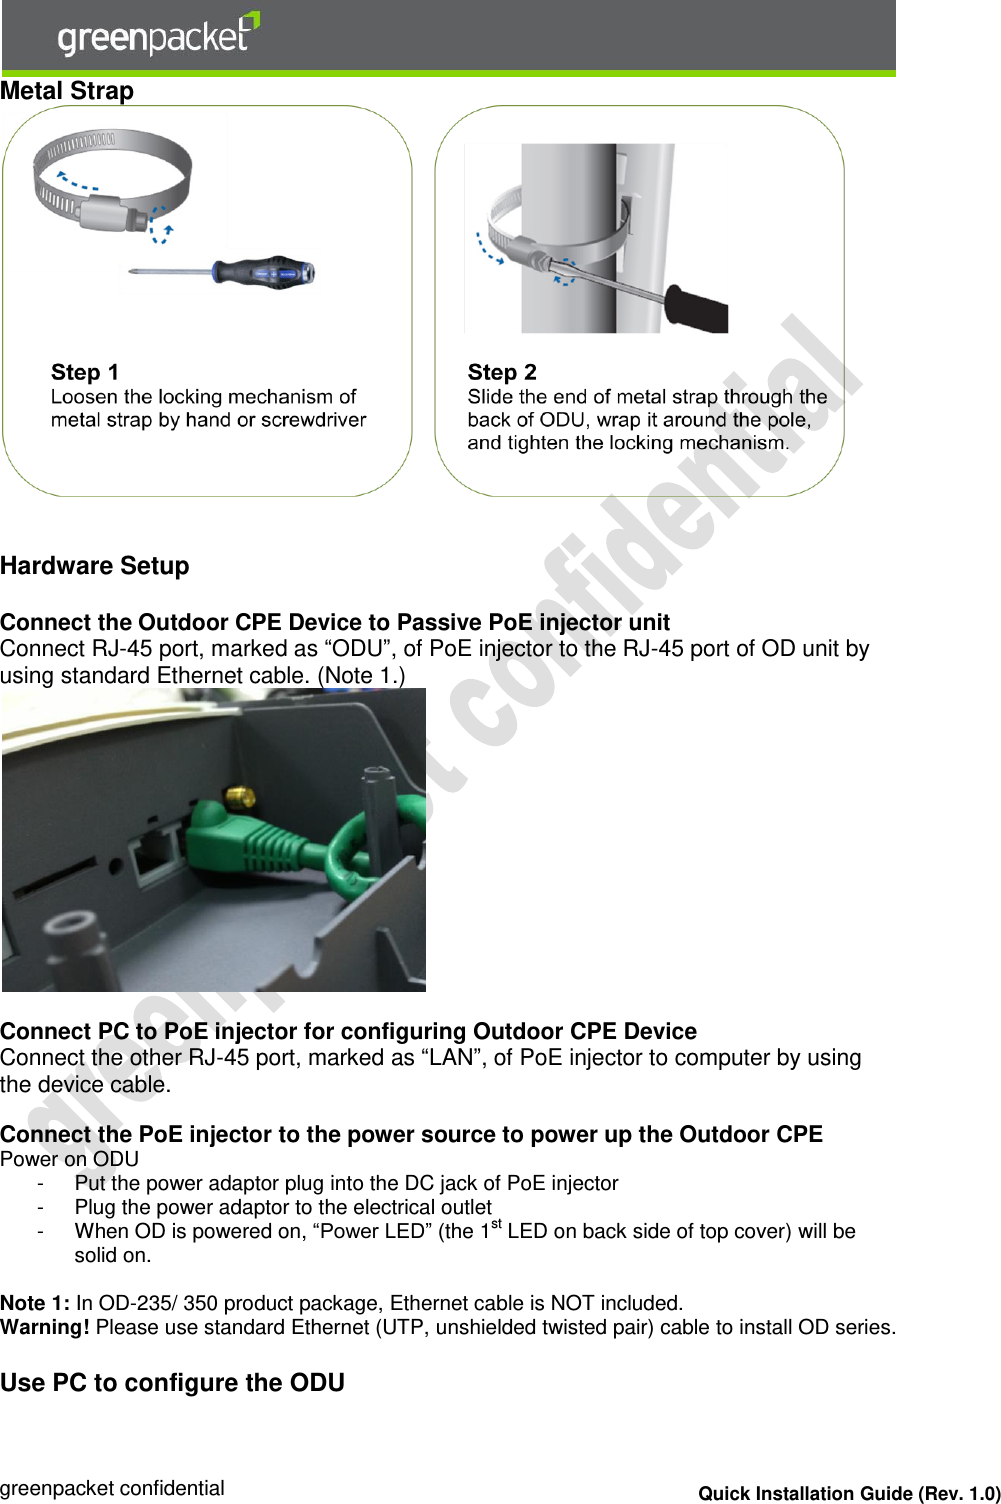  greenpacket confidential Quick Installation Guide (Rev. 1.0) Metal Strap     Hardware Setup  Connect the Outdoor CPE Device to Passive PoE injector unit  Connect RJ-45 port, marked as “ODU”, of PoE injector to the RJ-45 port of OD unit by using standard Ethernet cable. (Note 1.)   Connect PC to PoE injector for configuring Outdoor CPE Device Connect the other RJ-45 port, marked as “LAN”, of PoE injector to computer by using the device cable.  Connect the PoE injector to the power source to power up the Outdoor CPE Power on ODU -  Put the power adaptor plug into the DC jack of PoE injector -  Plug the power adaptor to the electrical outlet -  When OD is powered on, “Power LED” (the 1st LED on back side of top cover) will be solid on.  Note 1: In OD-235/ 350 product package, Ethernet cable is NOT included. Warning! Please use standard Ethernet (UTP, unshielded twisted pair) cable to install OD series.   Use PC to configure the ODU 